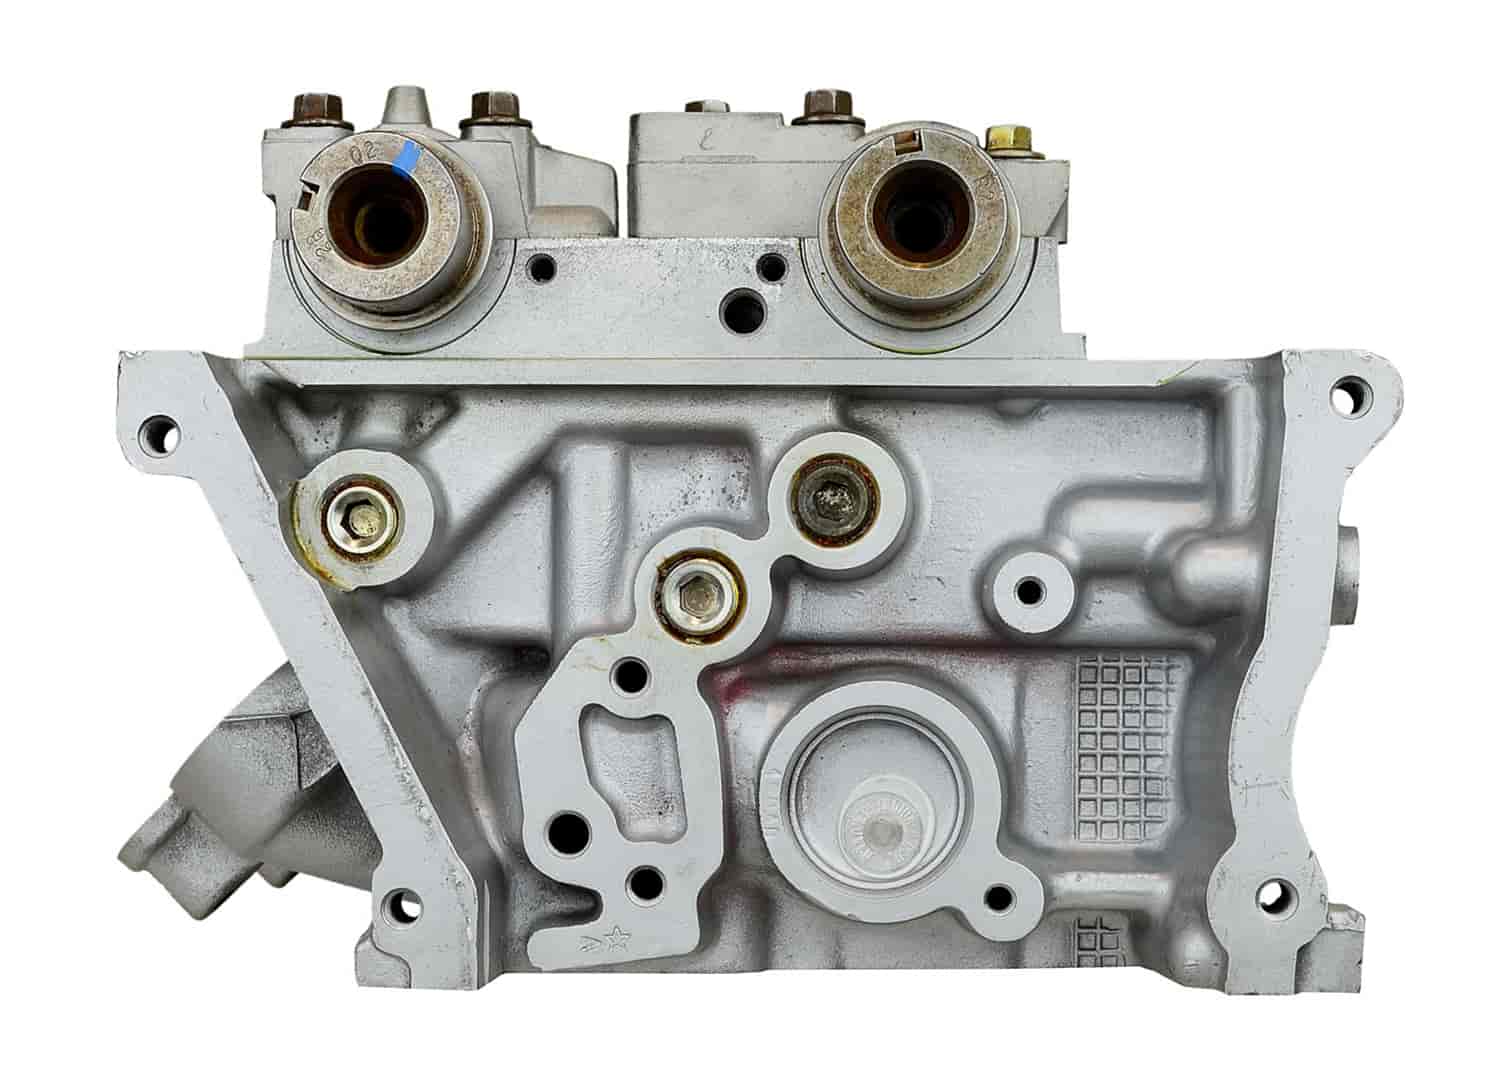 Remanufactured Cylinder Head for 1993-1996 Lincoln Mark VIII with 4.6L V8